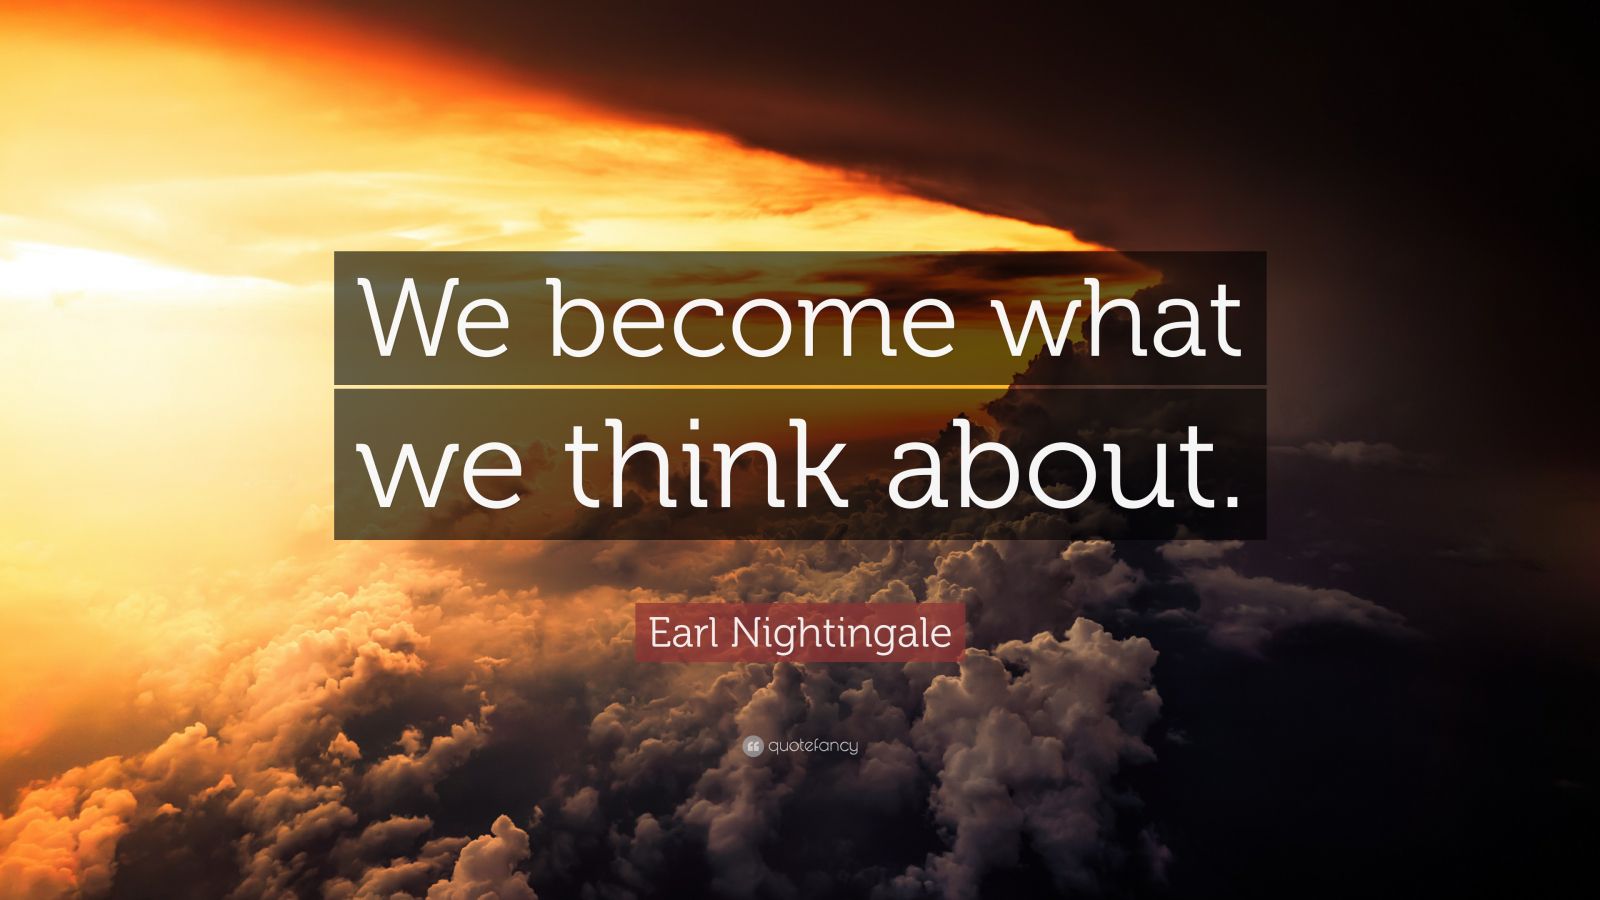 Earl Nightingale Quote: “We become what we think about.” (24 wallpapers